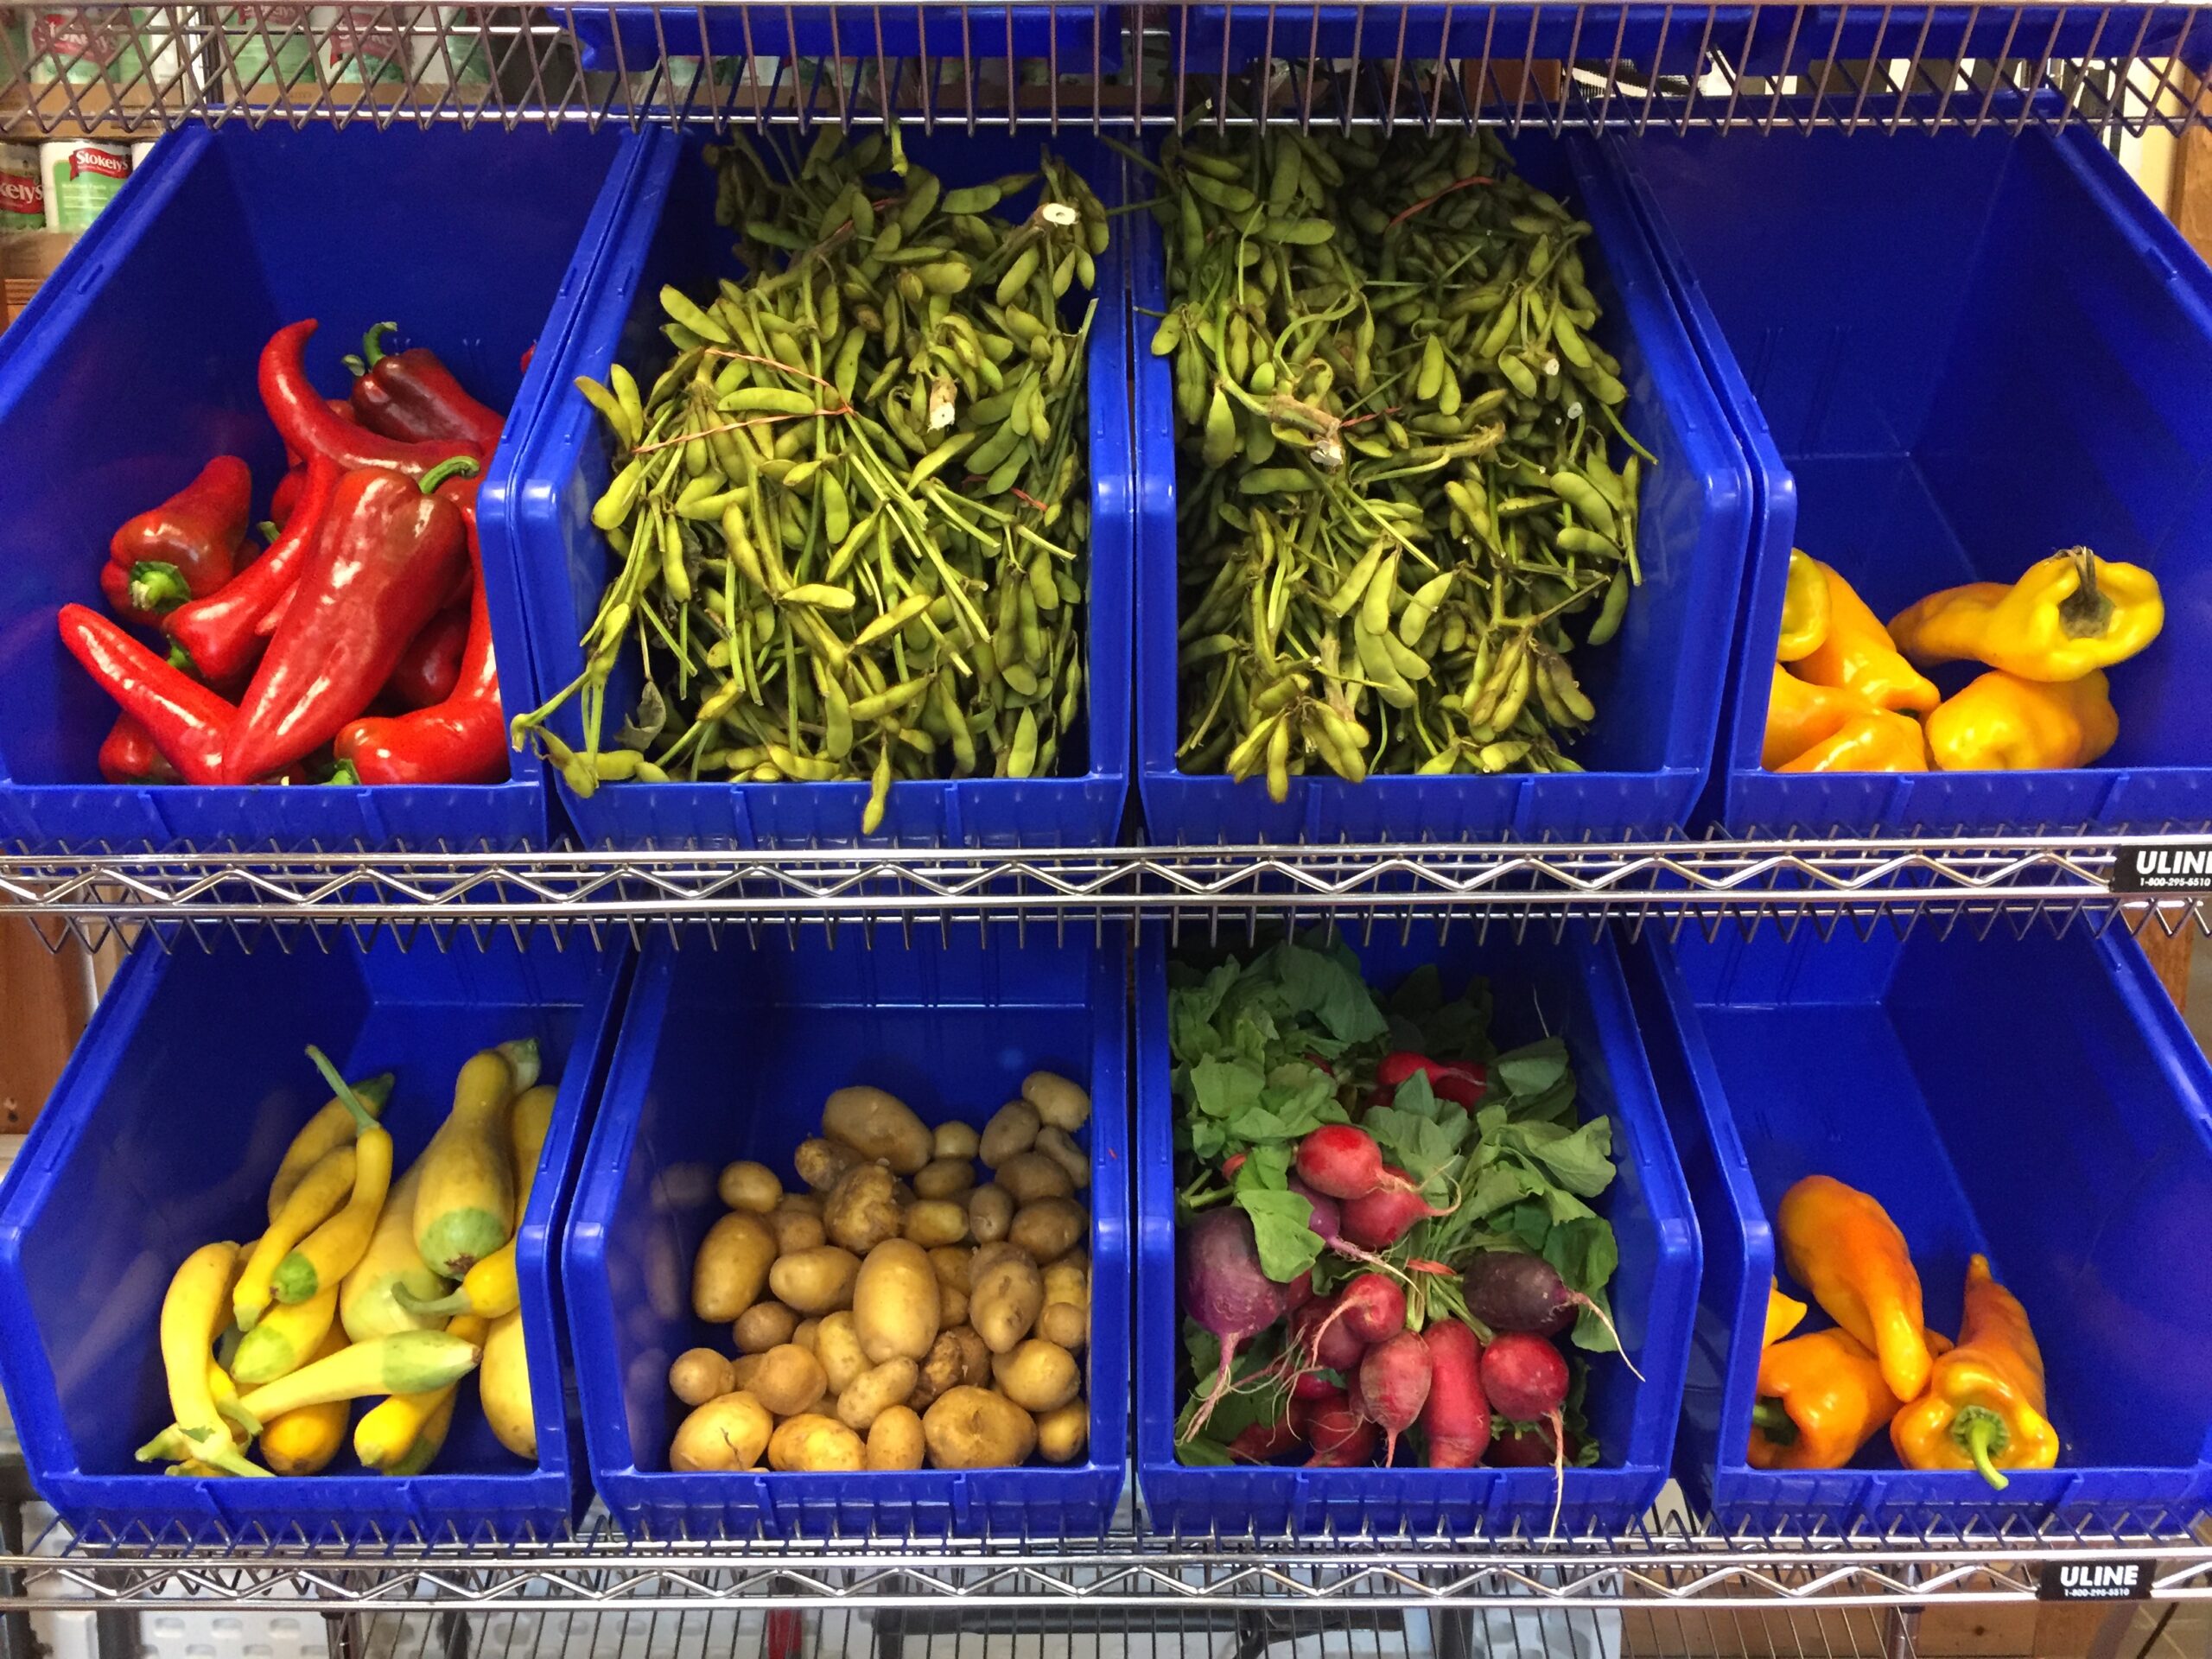 Eight blue bins full of produce lined up on wire shelving